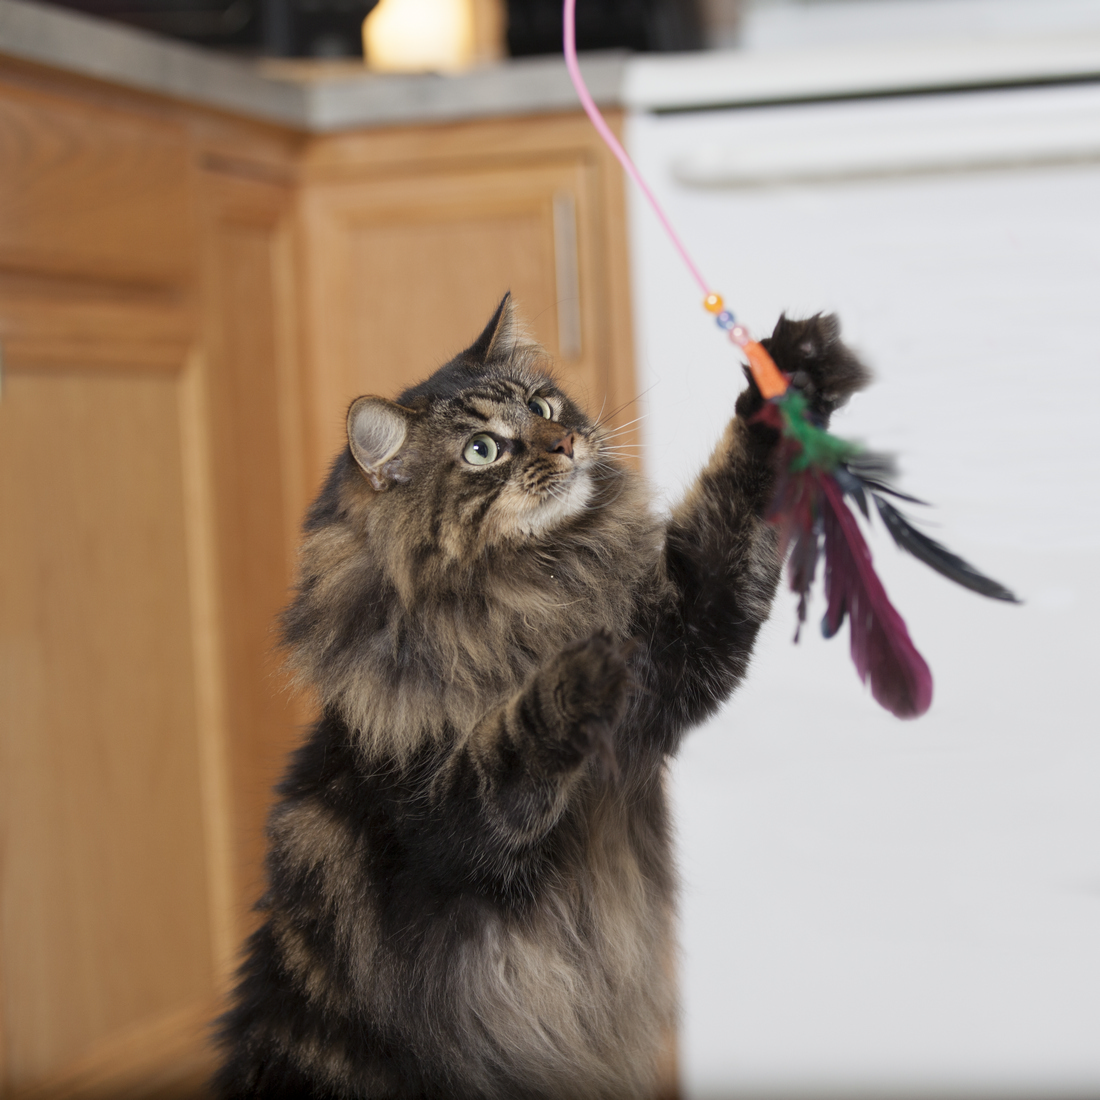 https://naturallyforpets.com/wp-content/uploads/2019/12/fishing-pole-cat-toy-2.jpg